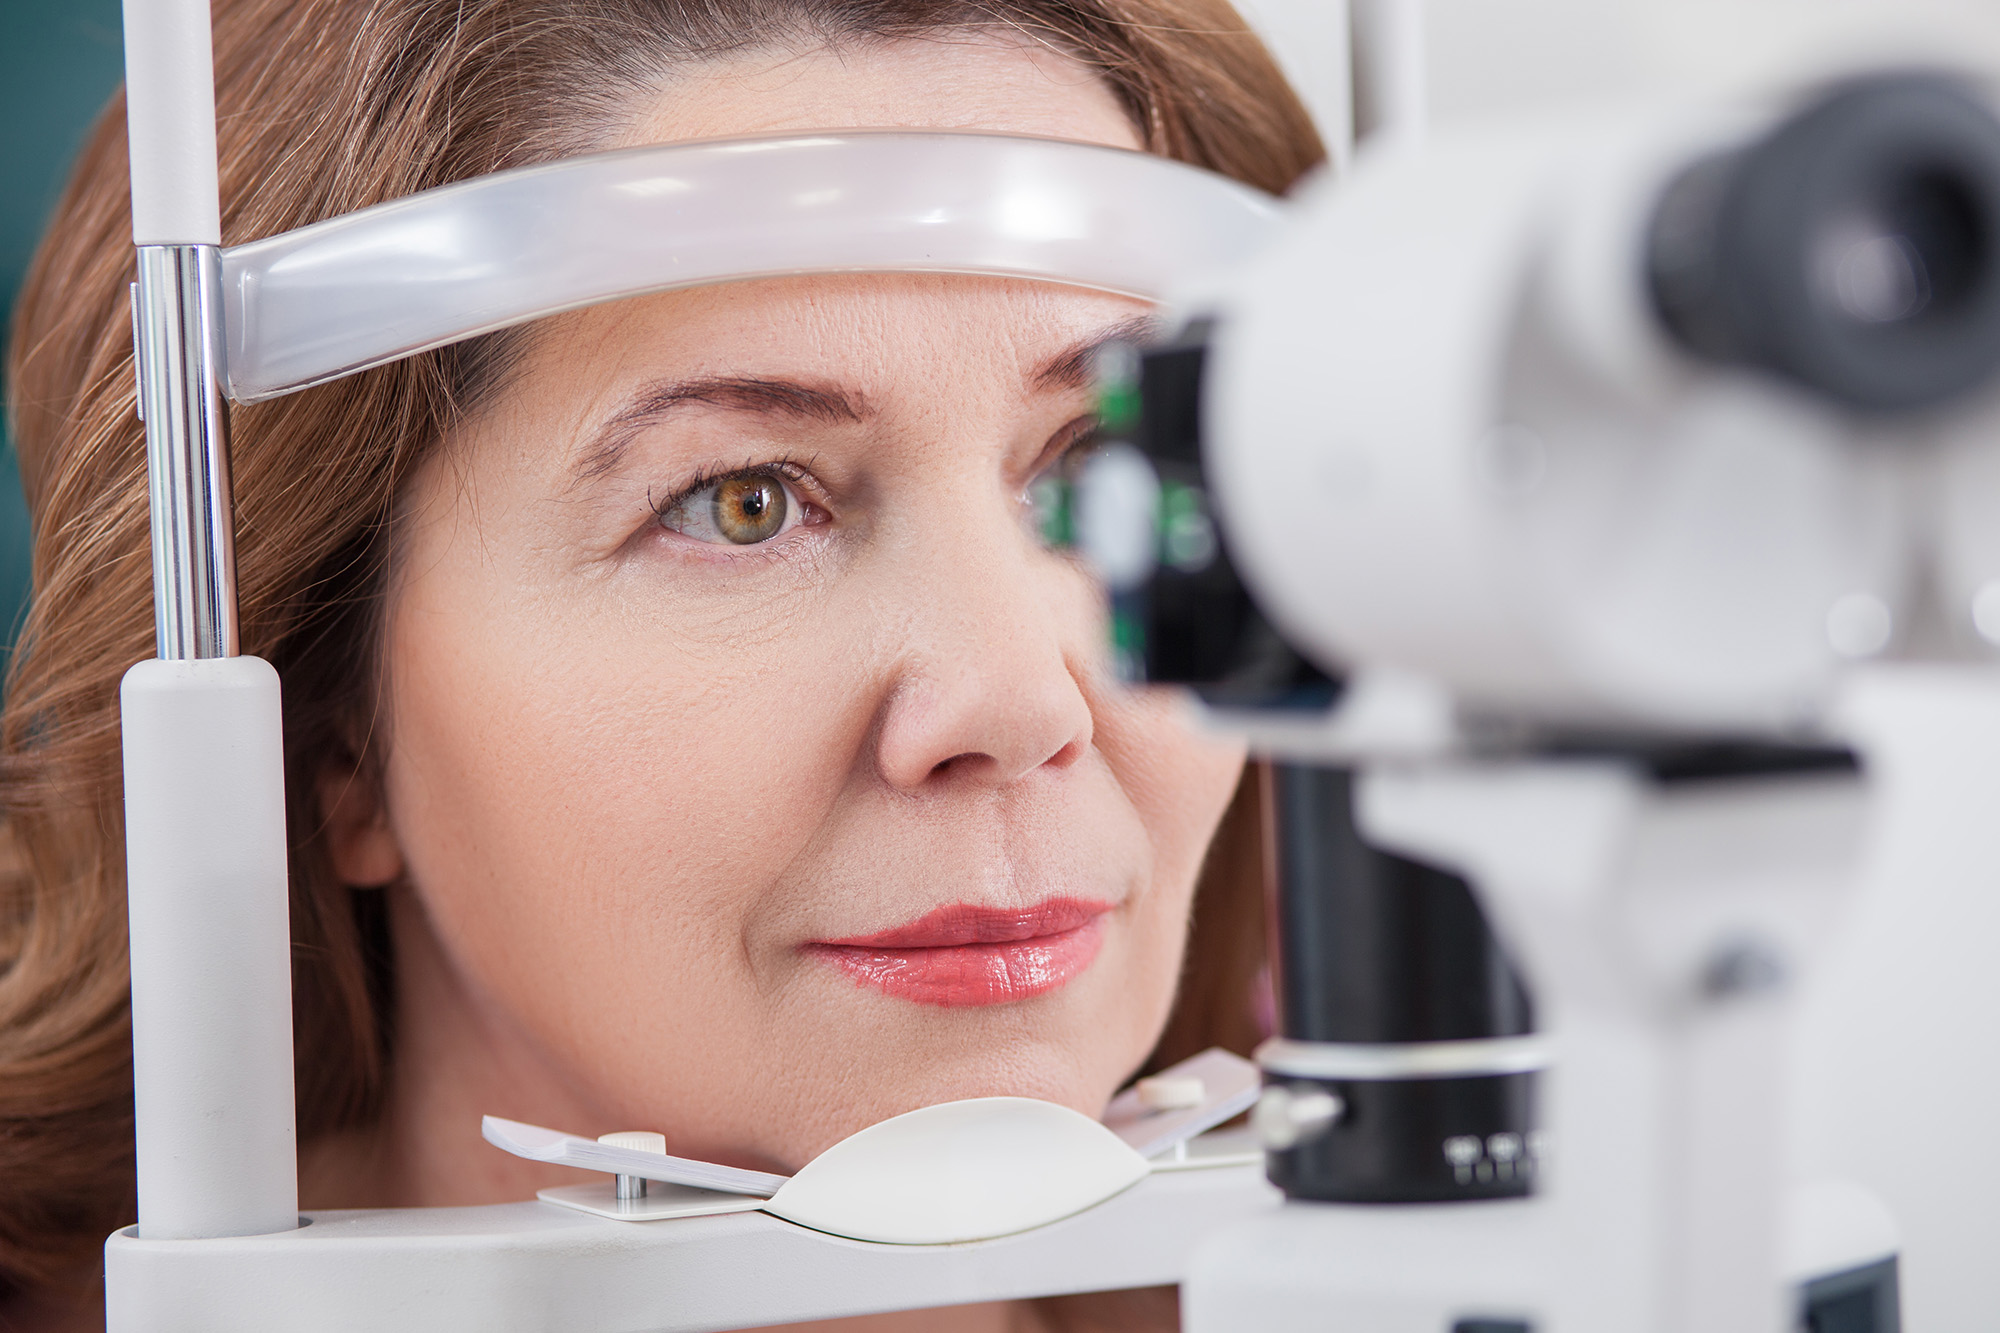 Laser Eye Surgery Malpractice, mistakes and injuries, medical negligence solicitors Bradford